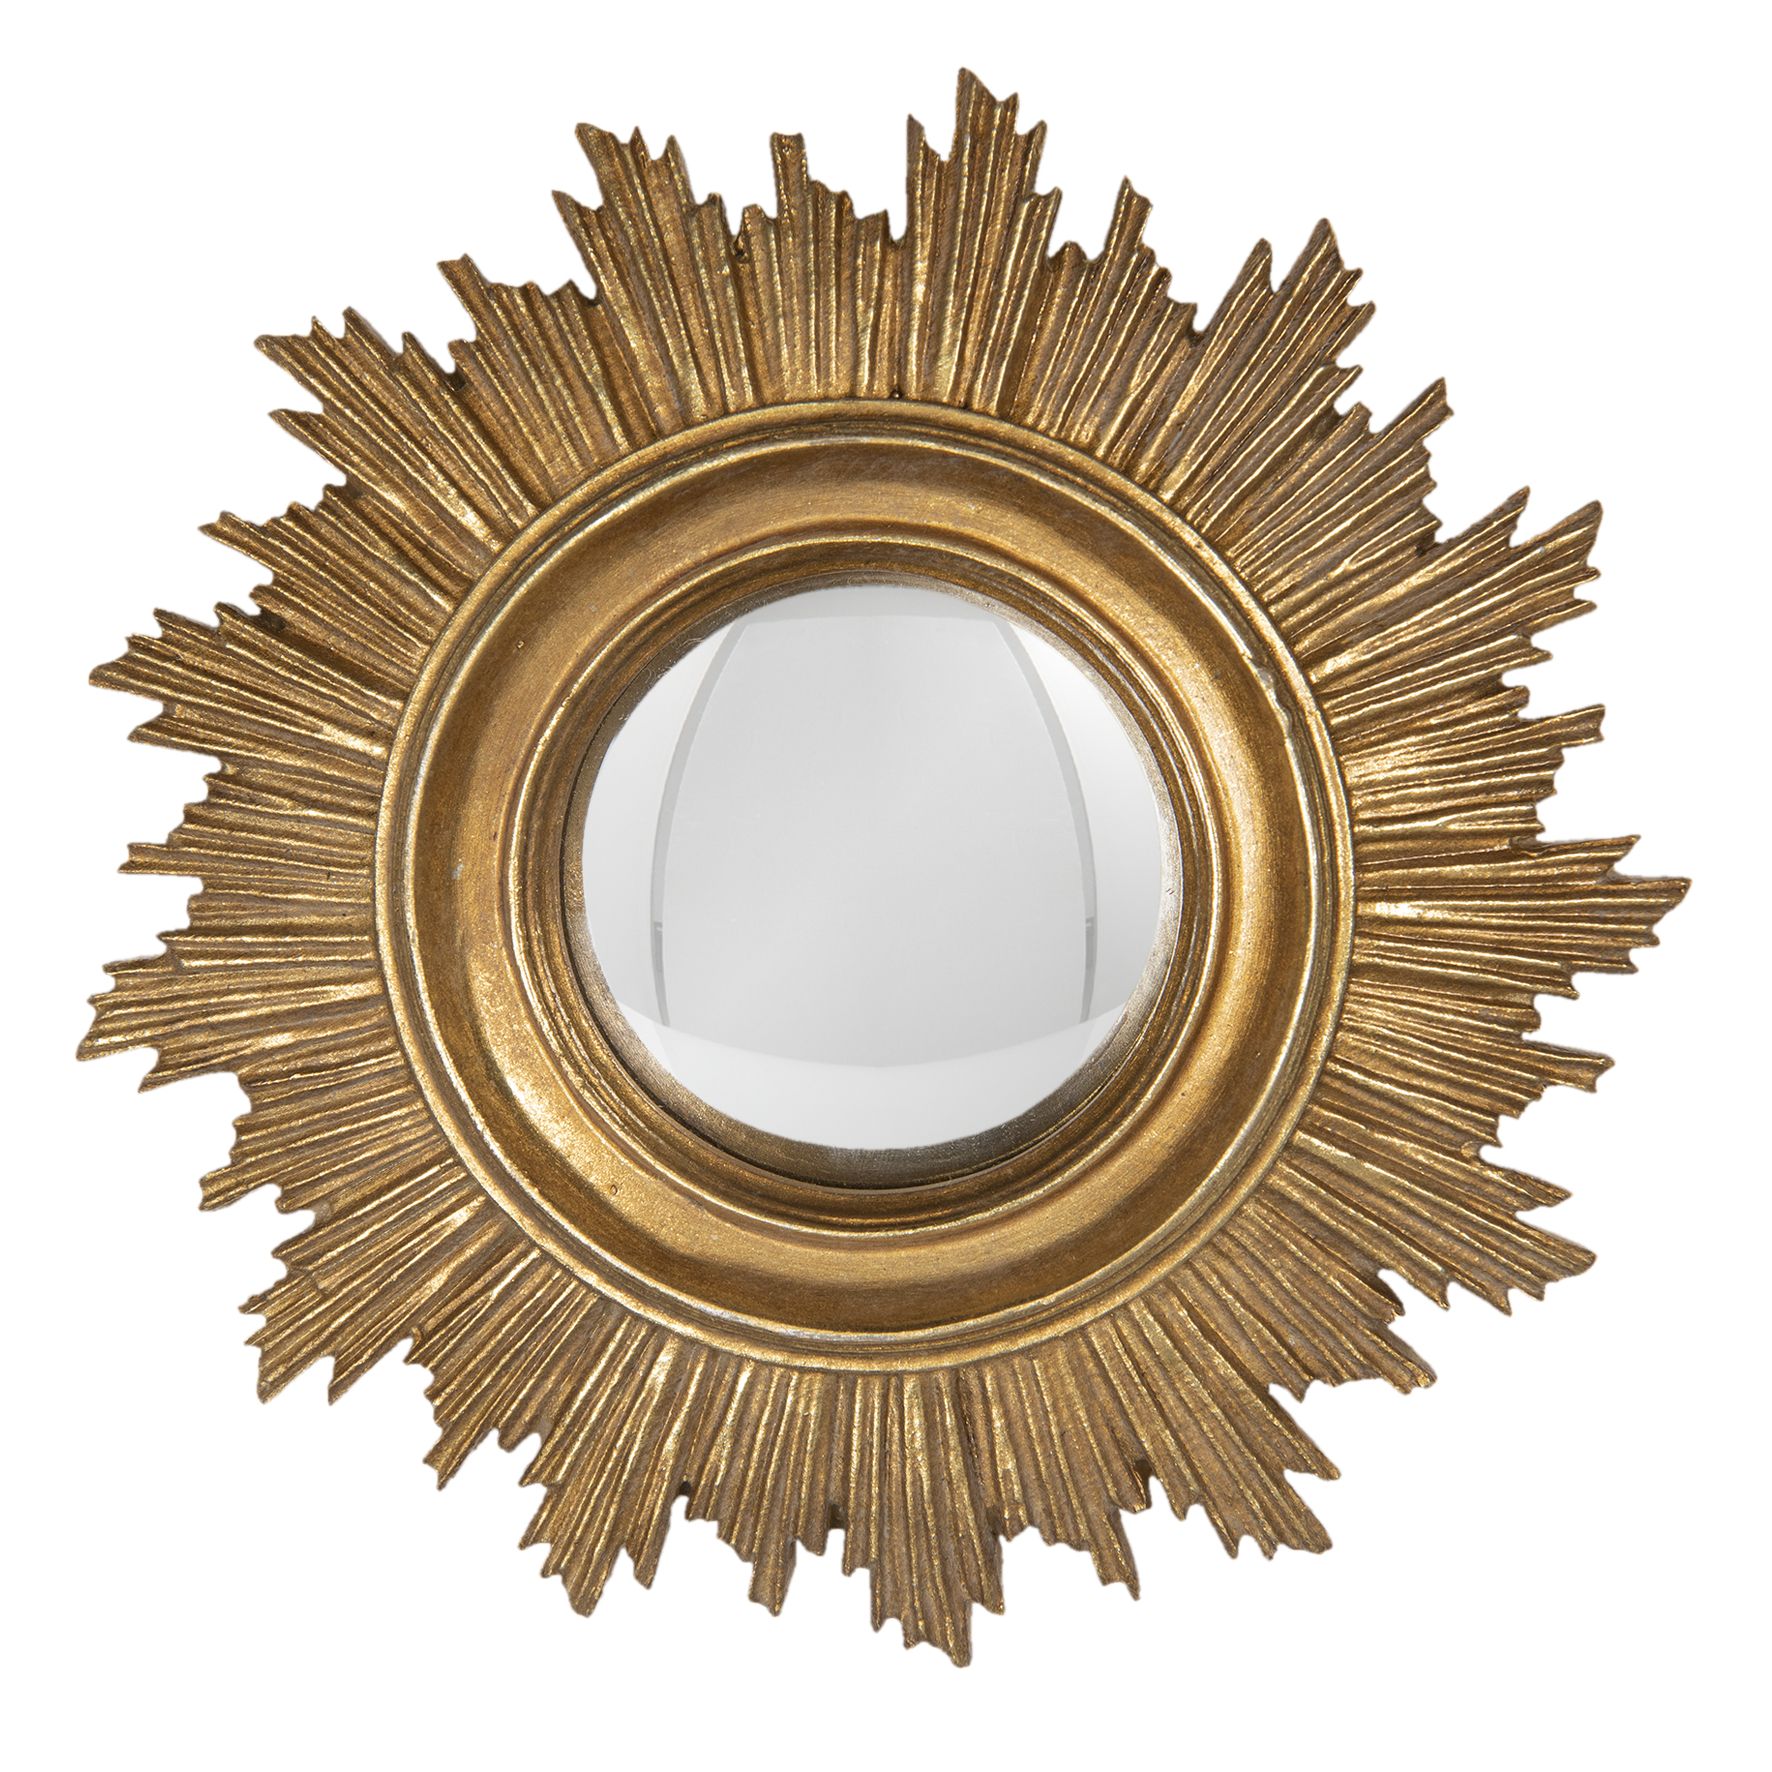 Decorative Small Round Wall Mirror Sunburst Starburst Antique Gold Sun For Antique Gold Leaf Round Oversized Wall Mirrors (View 11 of 15)